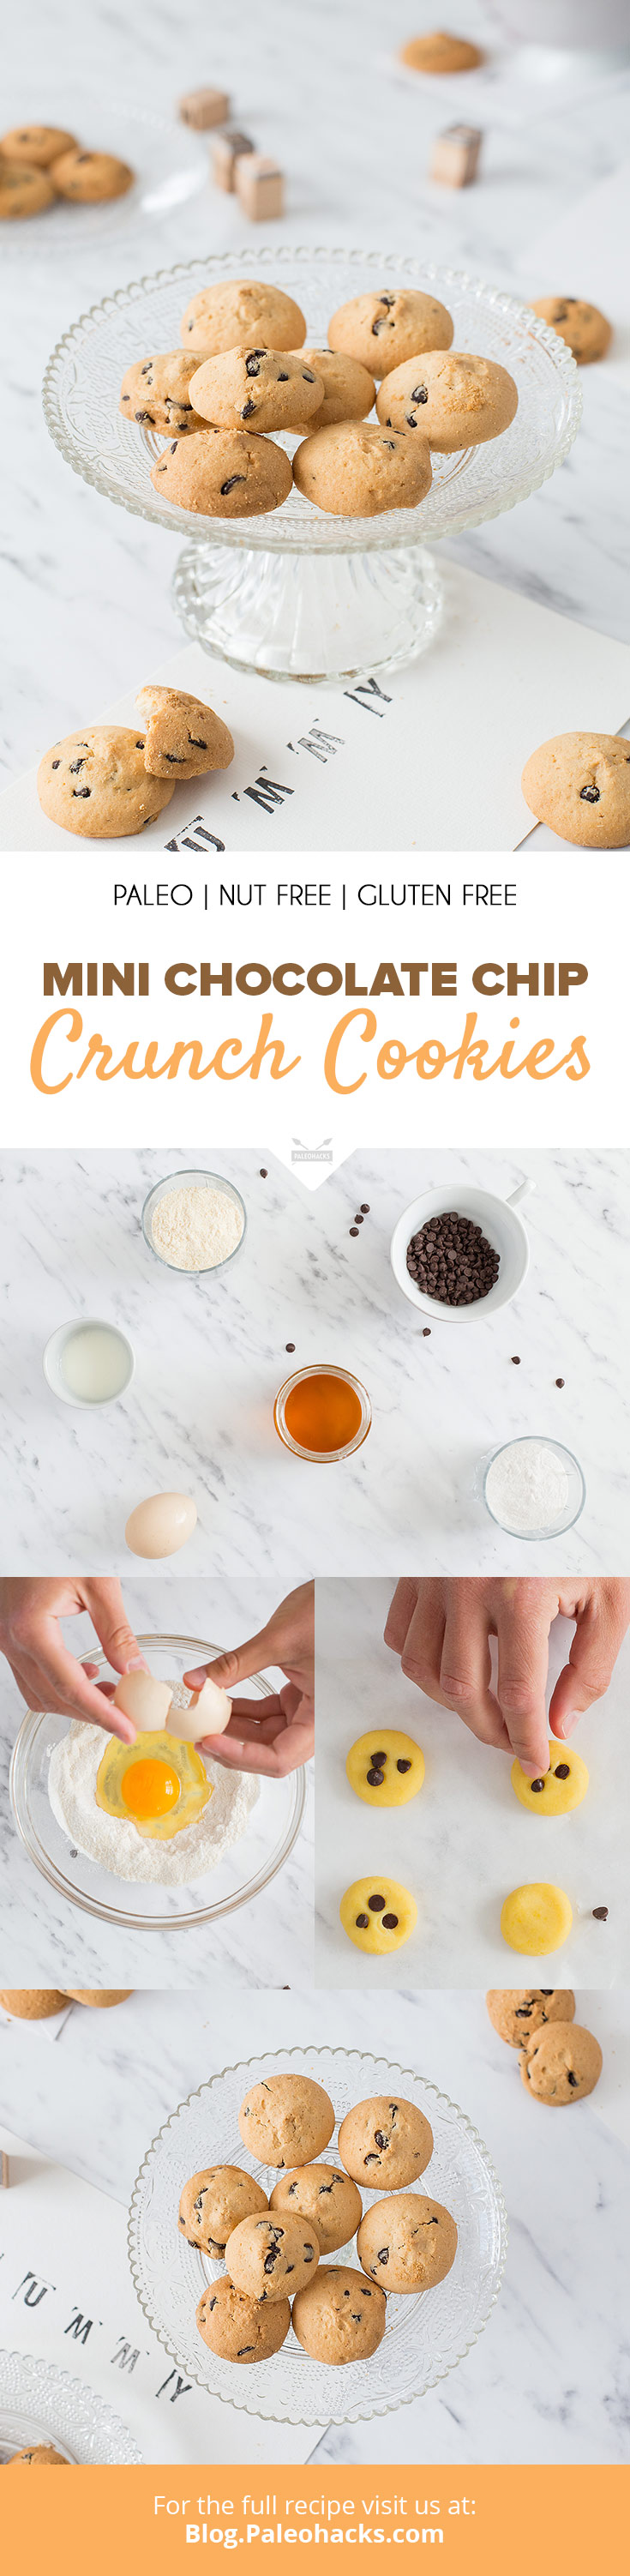 Dunk these mini chocolate chip crunch cookies into your coffee for a sweet morning treat. Simple to make and an easy go-to snack for work or school.